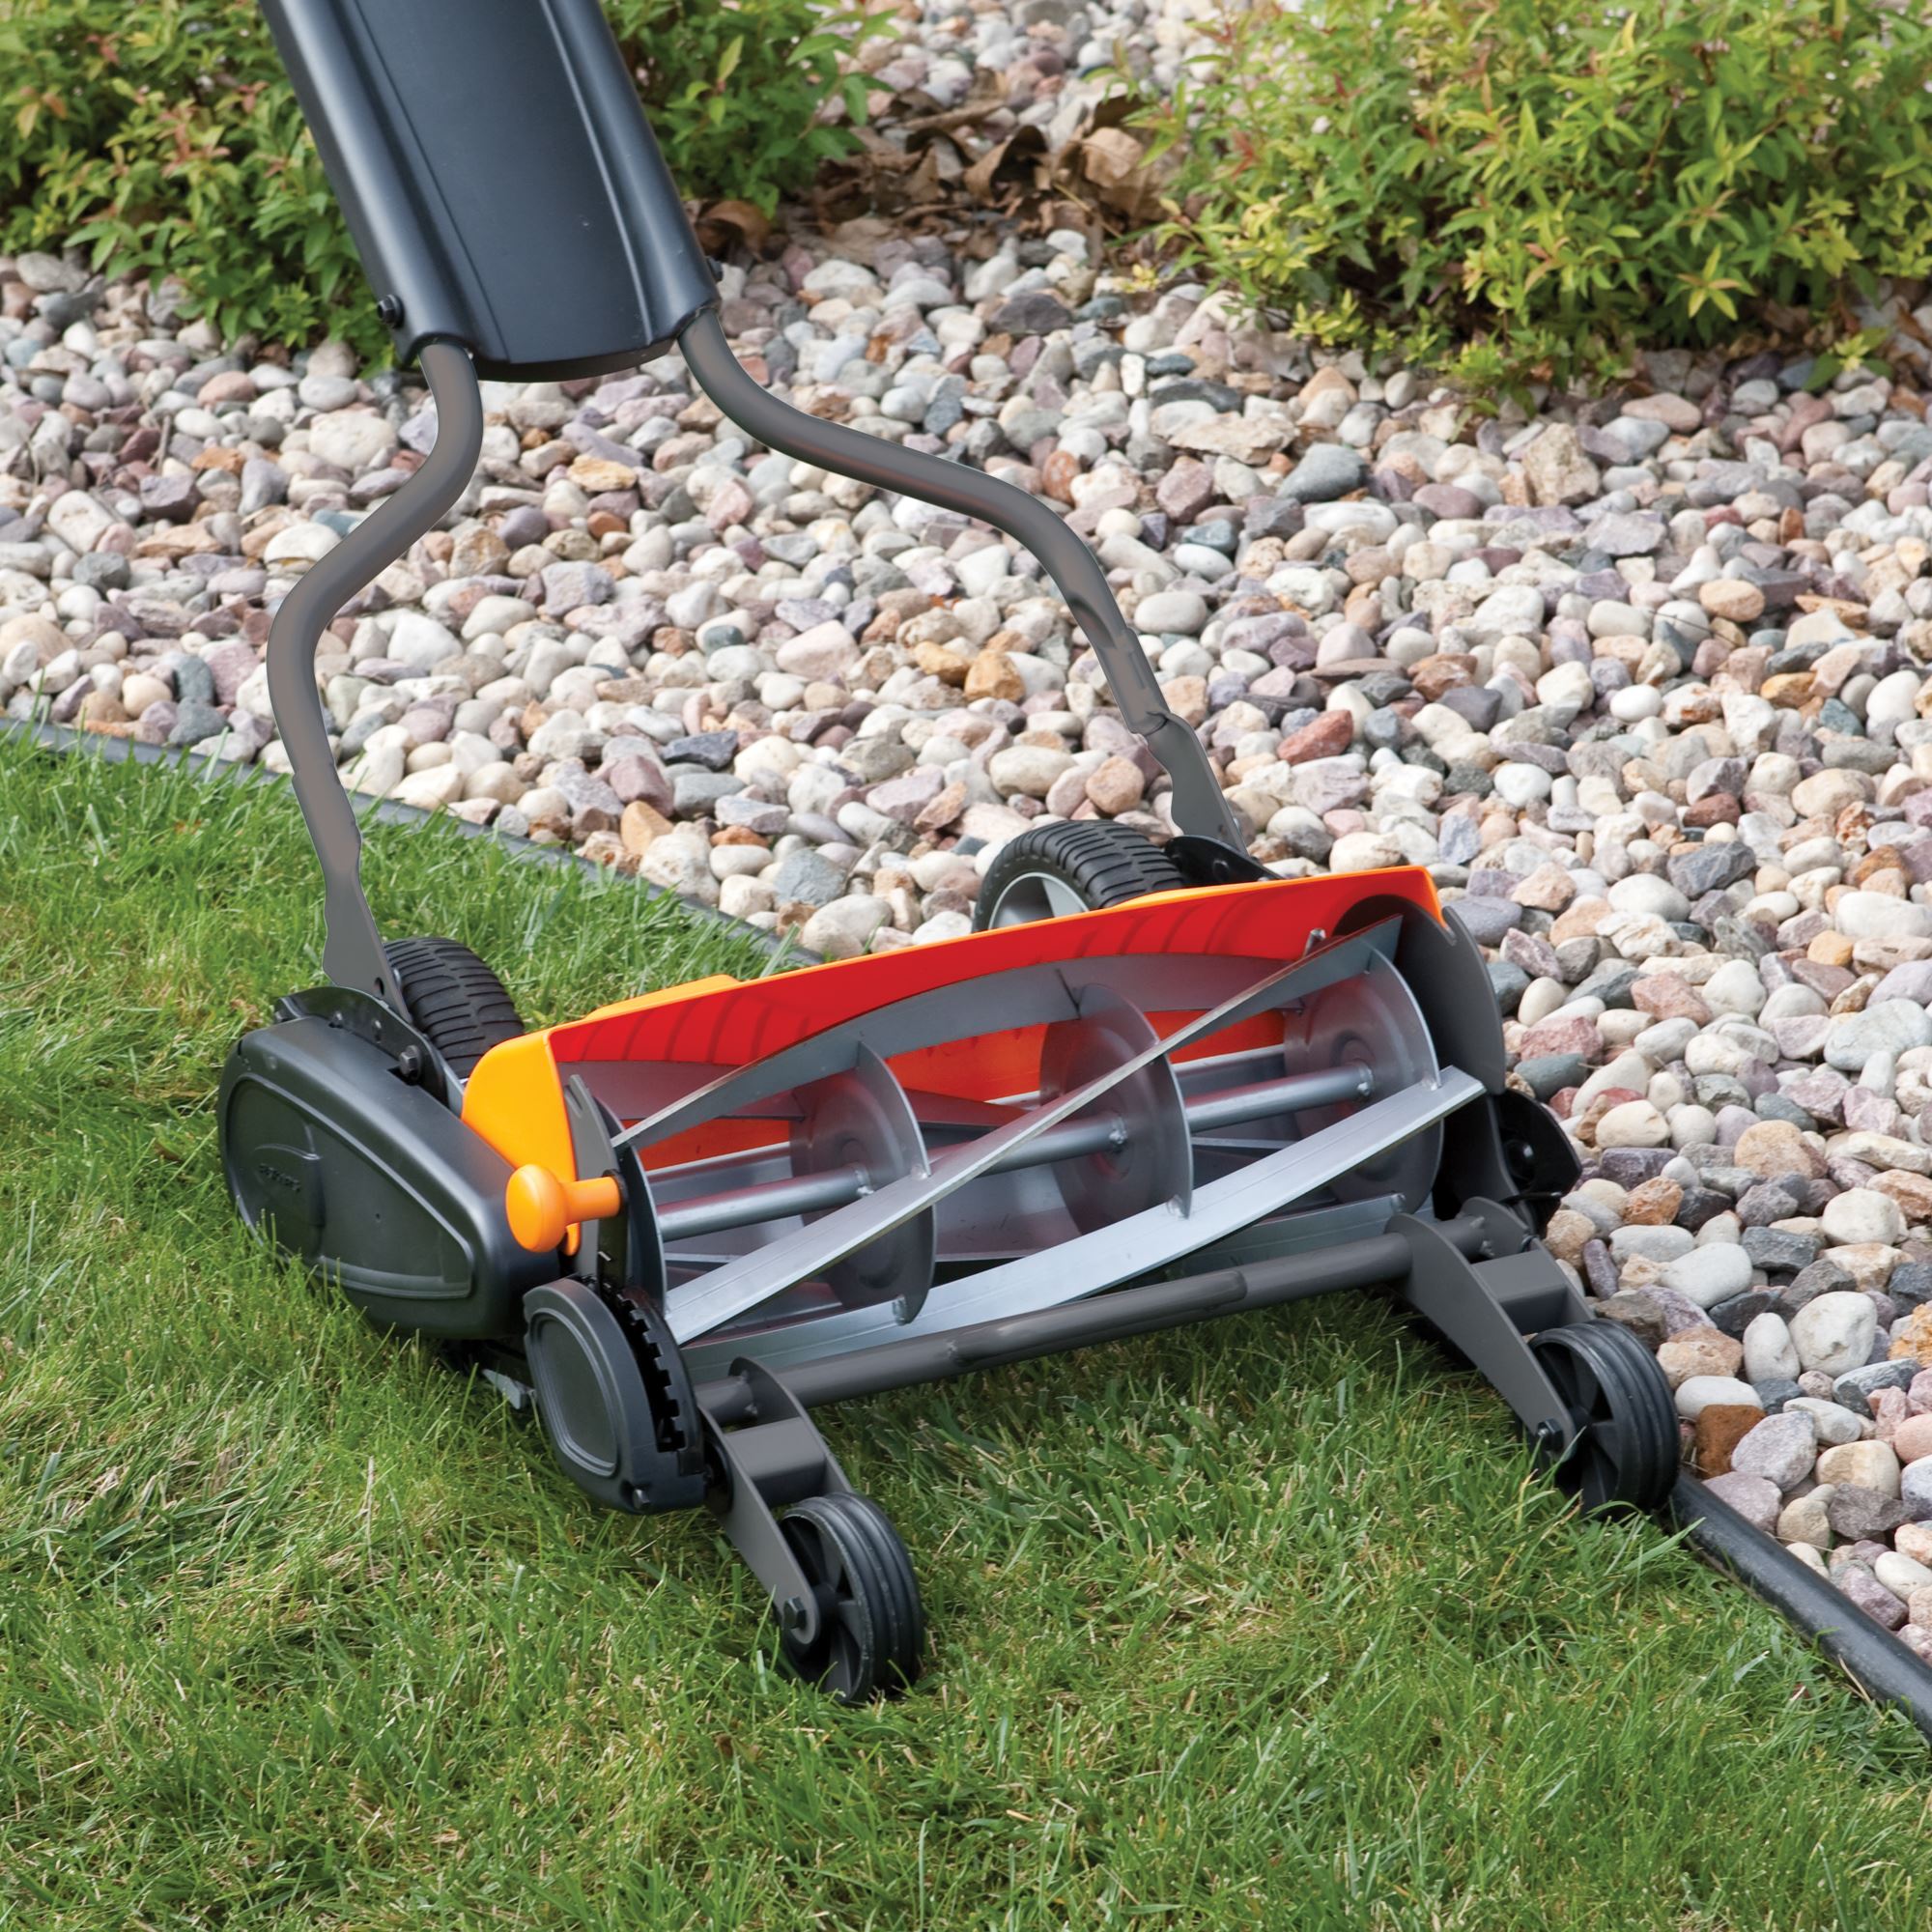 Reel Mowers: A Smart Choice for Your Lawn, Your Health, Your